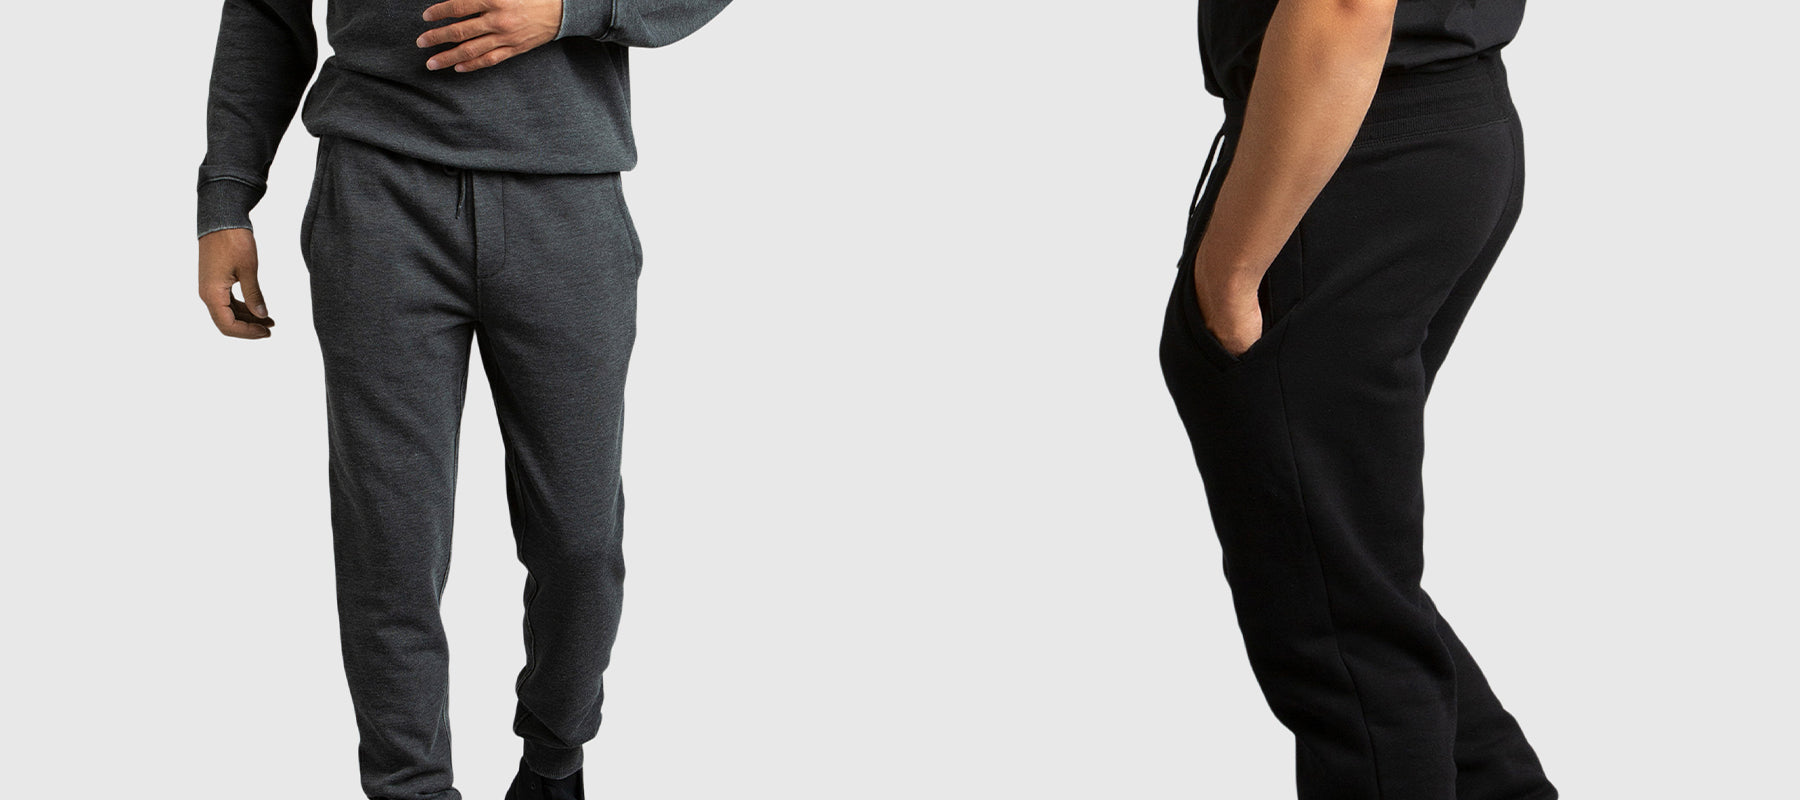 Shop all our men’s classic joggers and sweatpants.